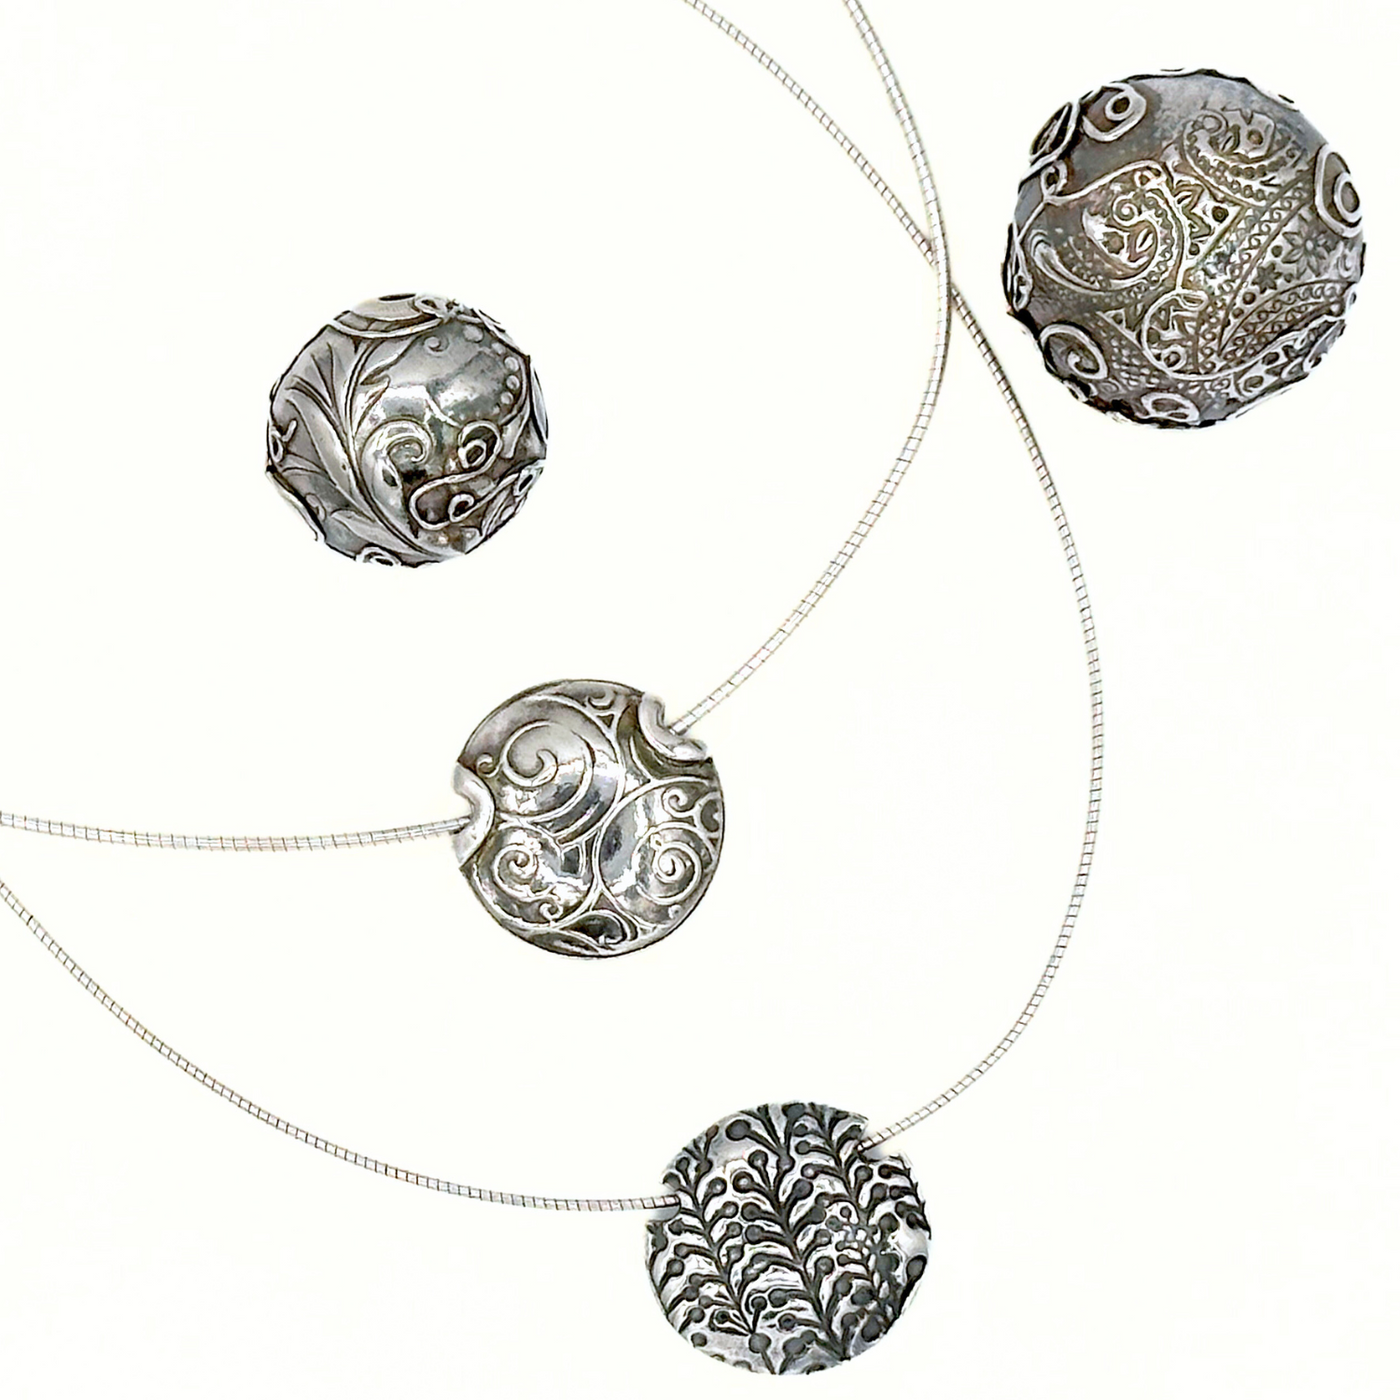 Hollow Metal Clay Pendant with Tammy Honaman May 18, 10am-5pm